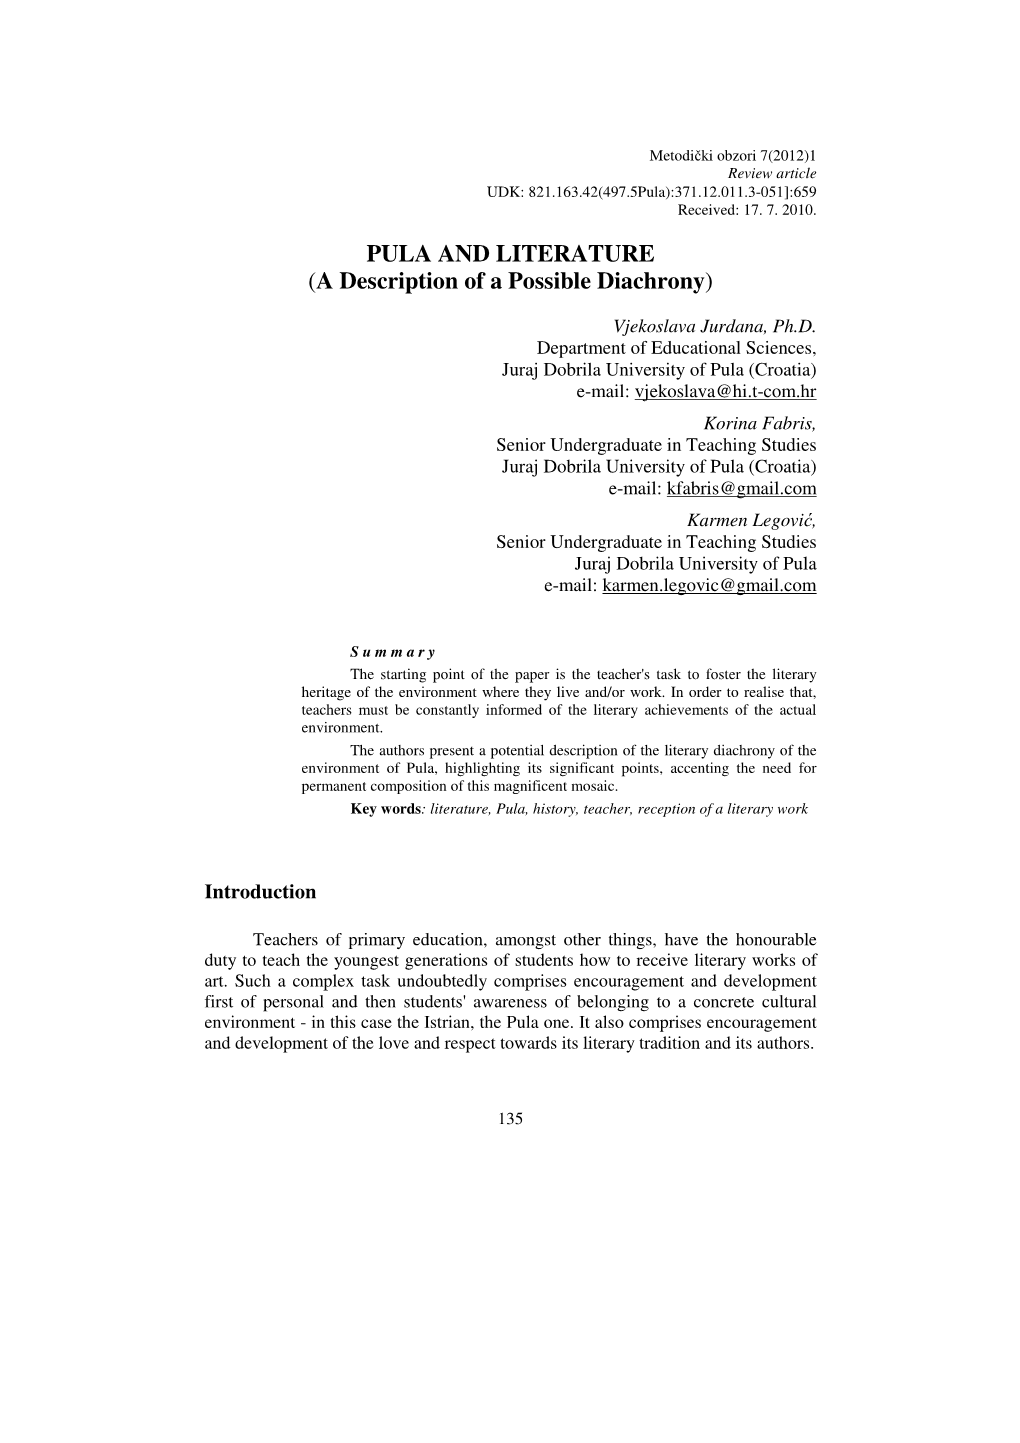 PULA and LITERATURE (A Description of a Possible Diachrony )